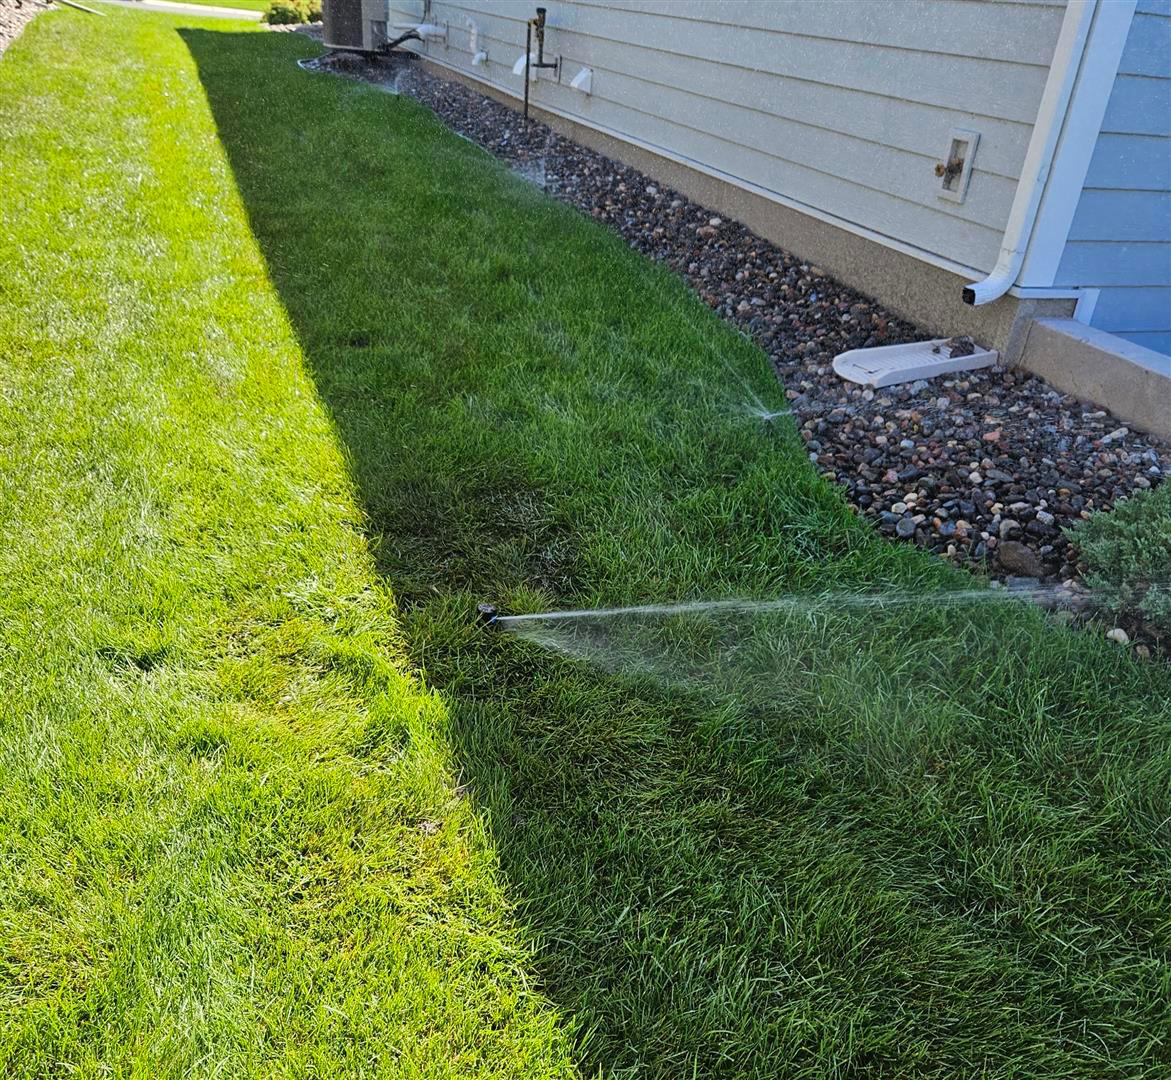 Damaged or malfunctioning sprinkler heads can lead to uneven watering. Time Bomb Irrigation specializes in sprinkler head replacement, ensuring every corner of your landscape receives the care it deserves.